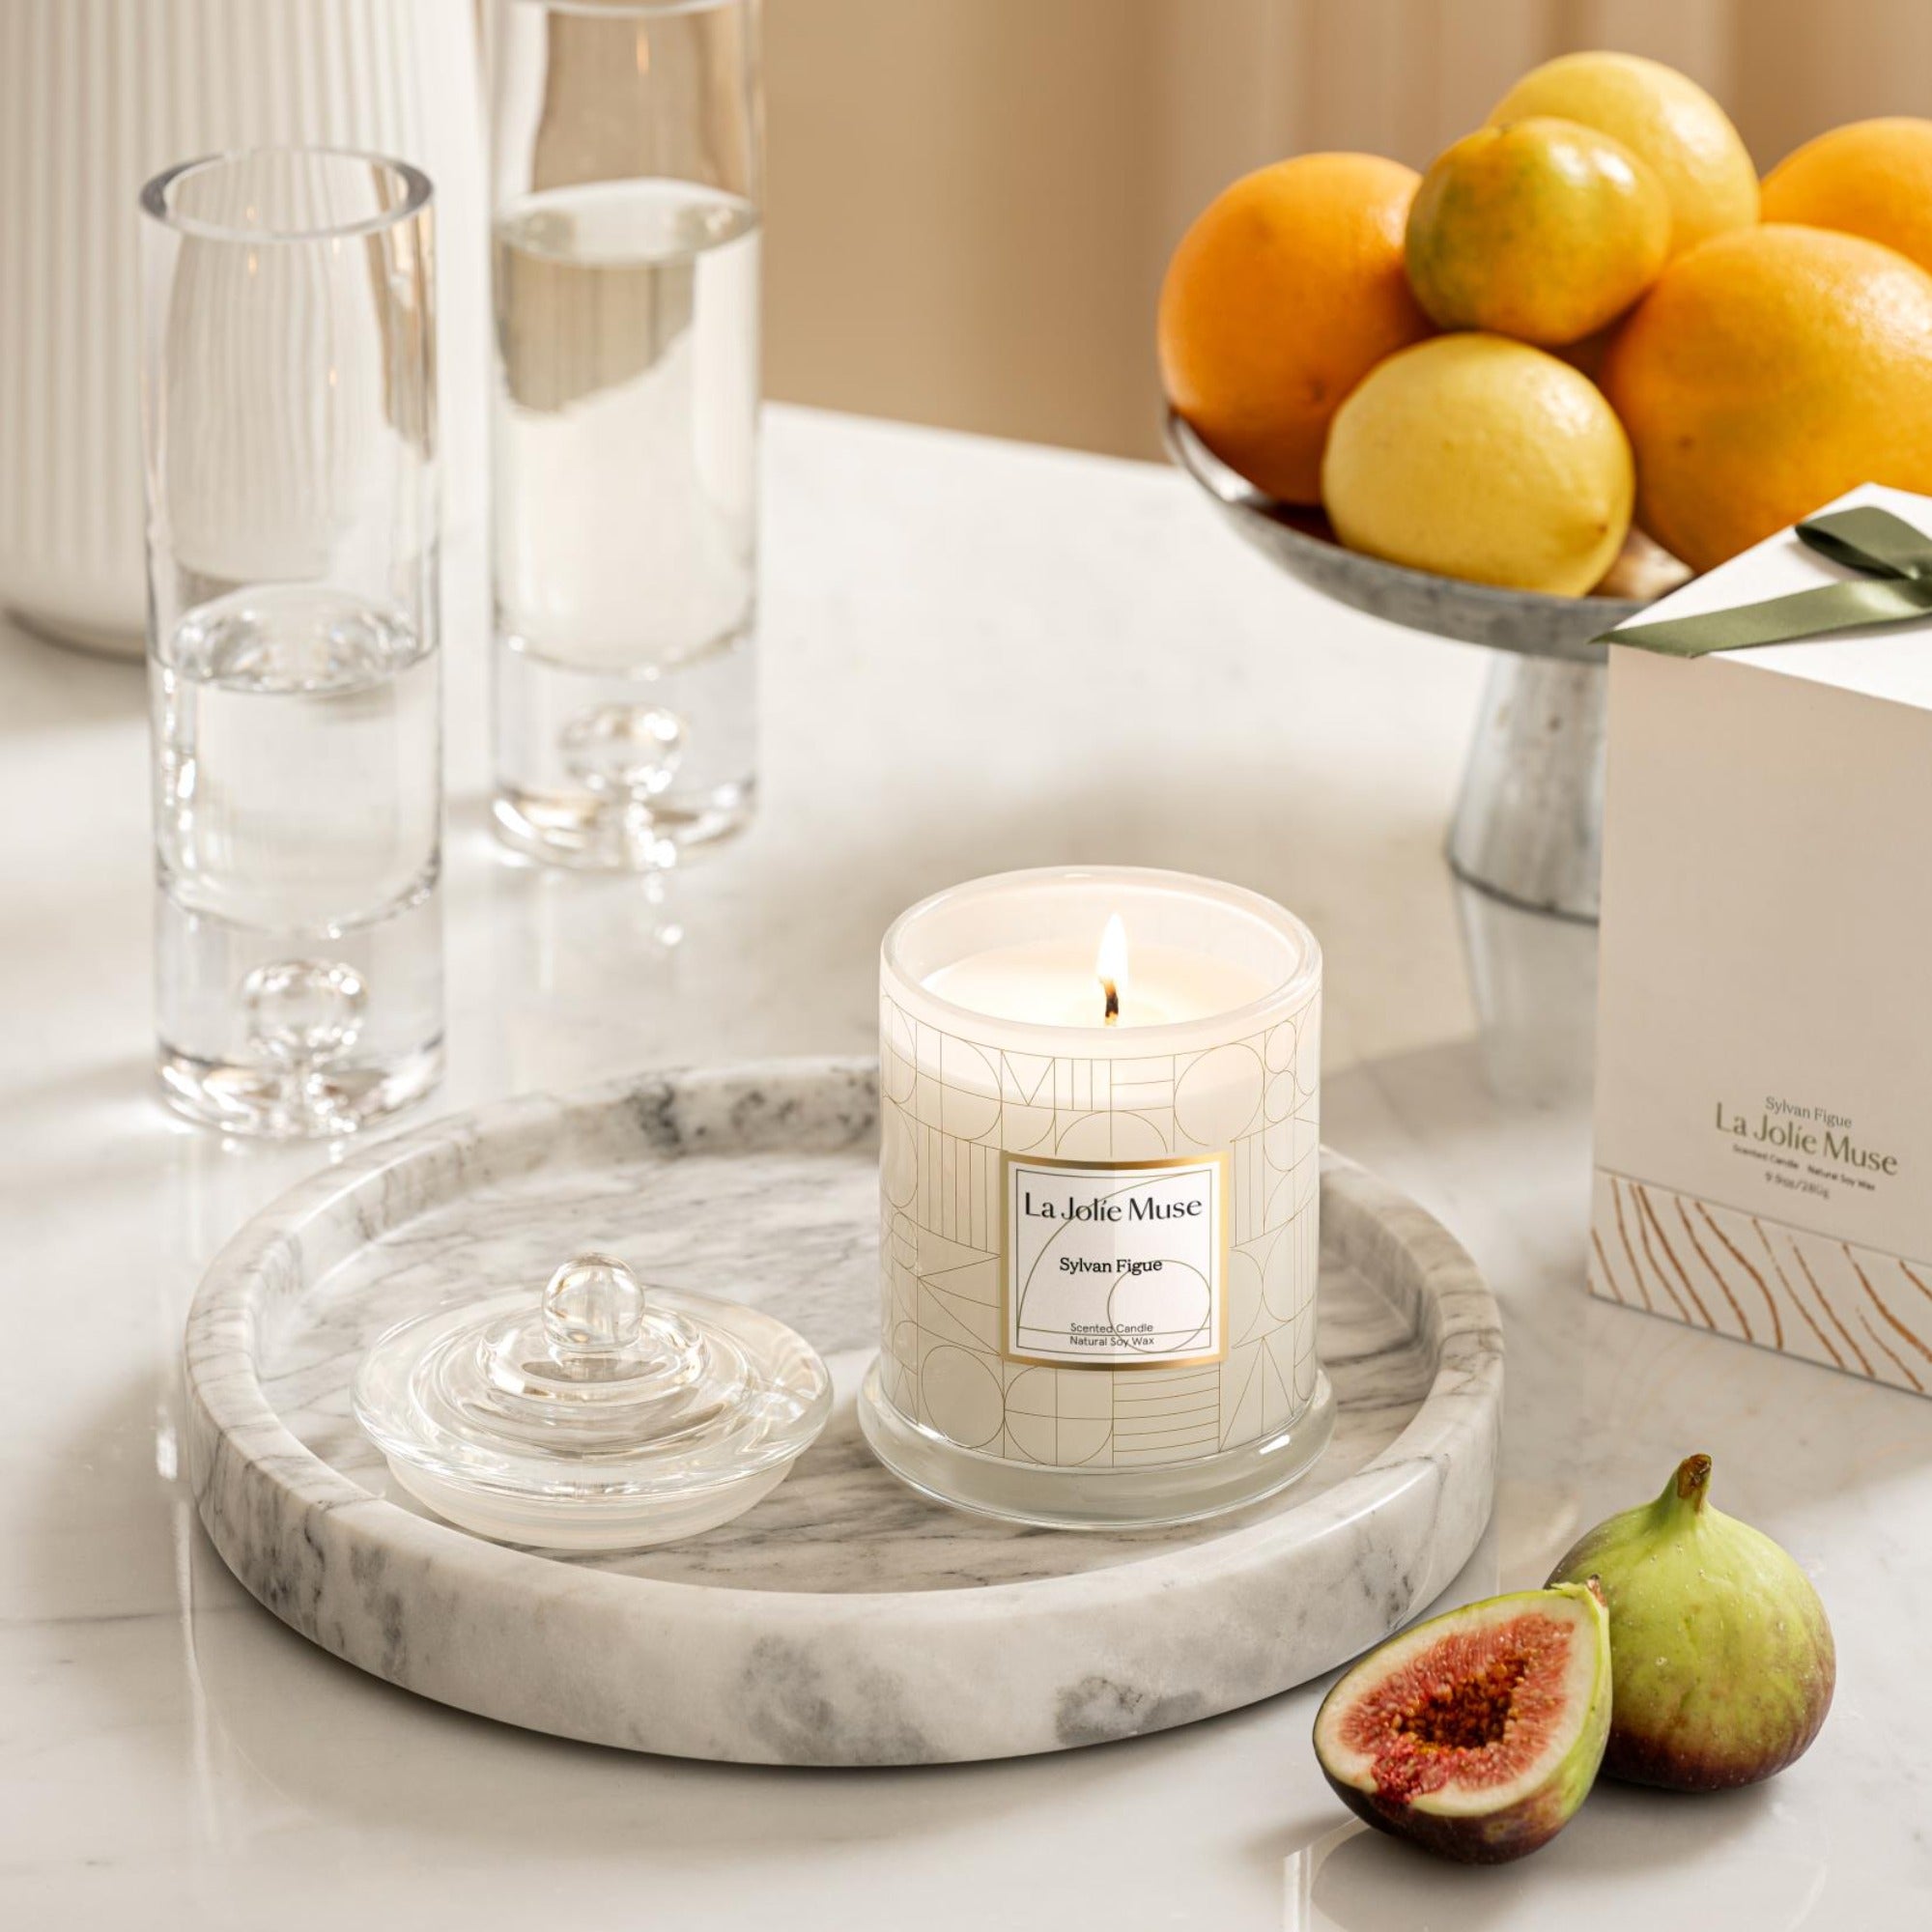 Photo shot of a lit Roesia - Sylvan Figue 10oz candle placed on a marble tray, surrounded by glasses, oranges, figs, and candle packaging